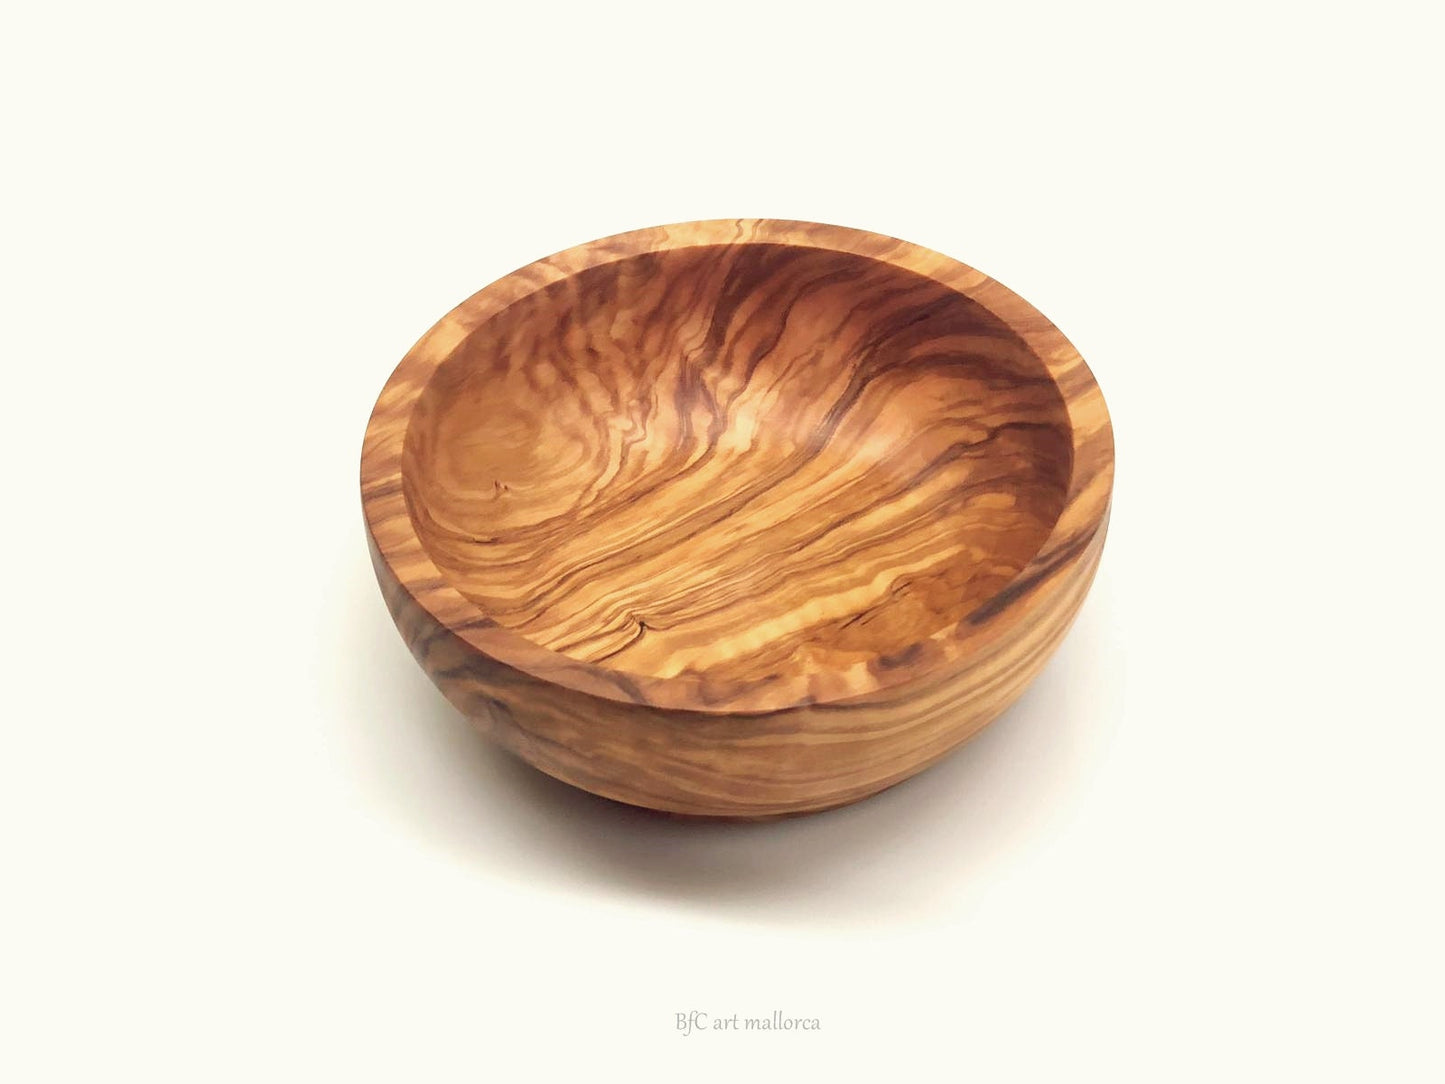 Custom Cereal Bowl, Anniversary Gift, Snack Bowl, Wood Cereal Bowl, Father's Day, Wedding Gift, Retro Salad Bowl, Mid Century Bowl, Mom Gift